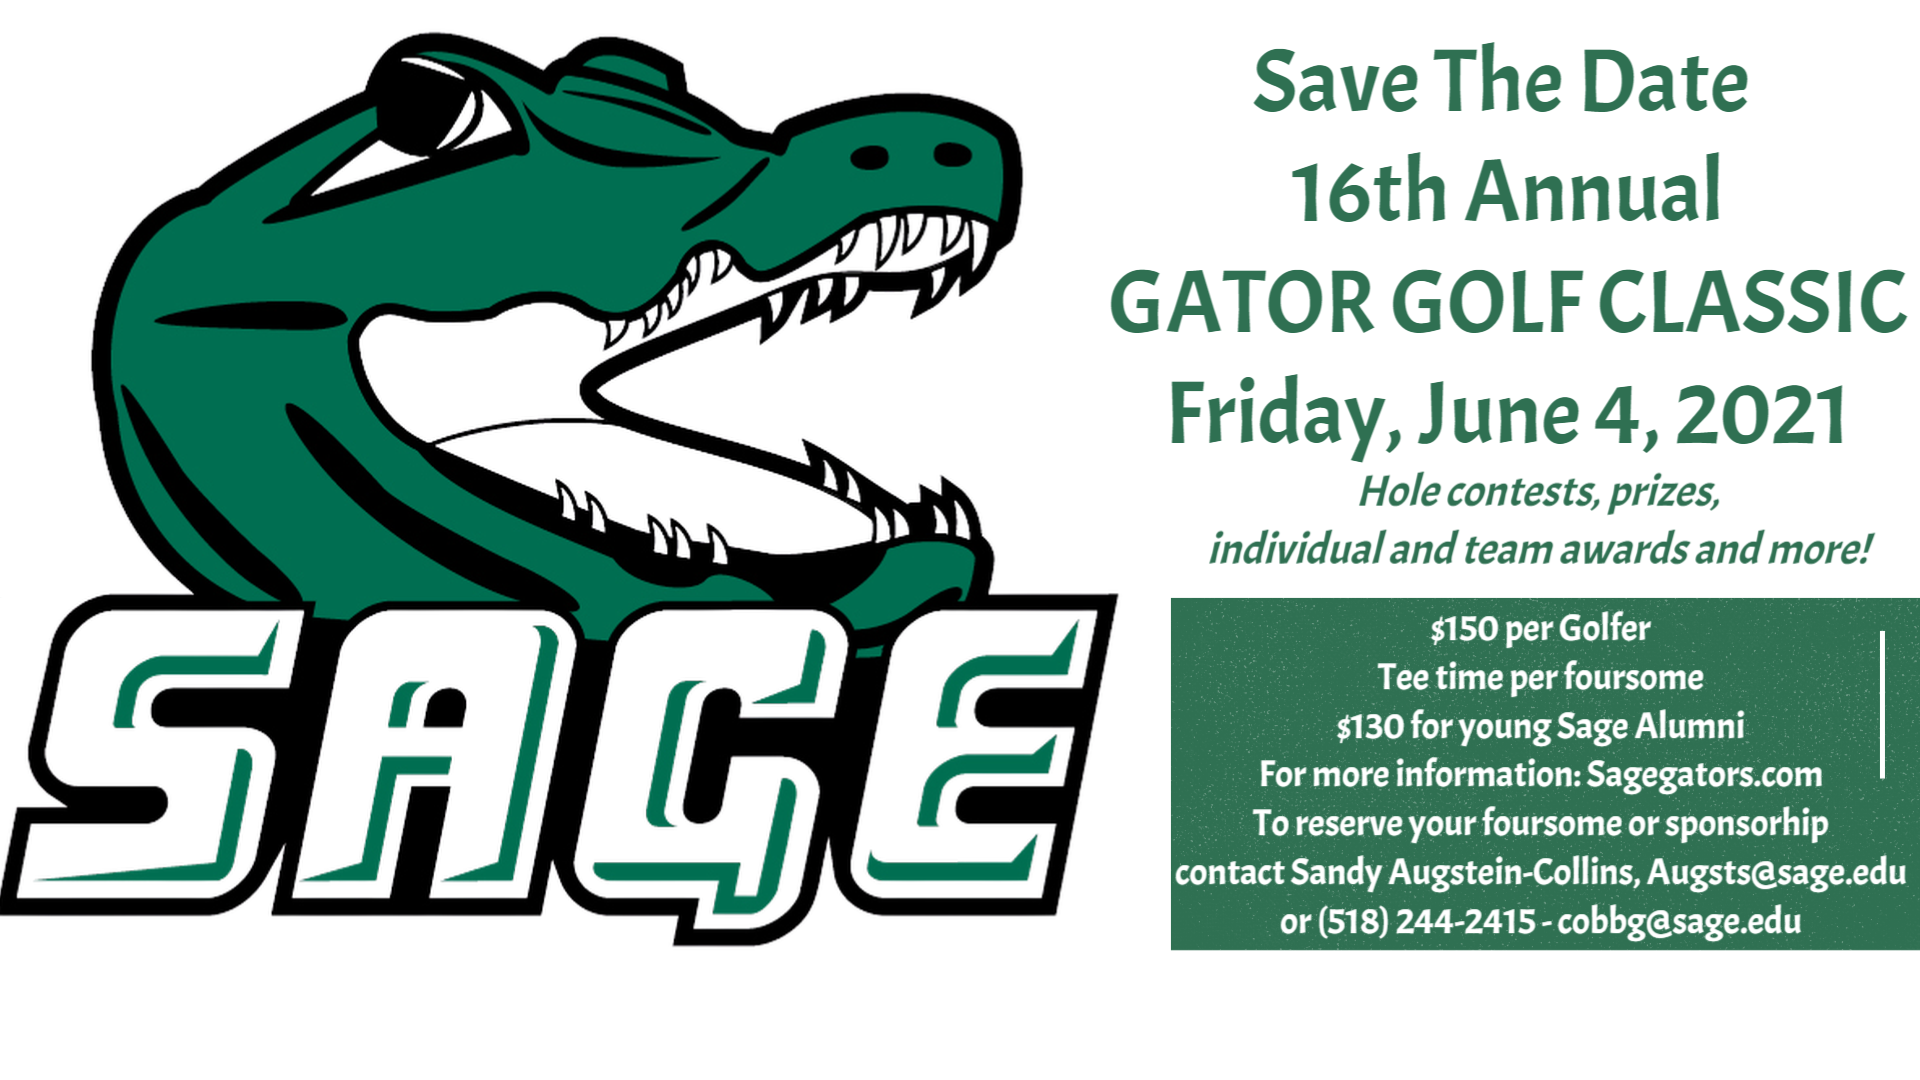 Mark your Calendar for the 16th Annual Gator Golf Classic on June 4